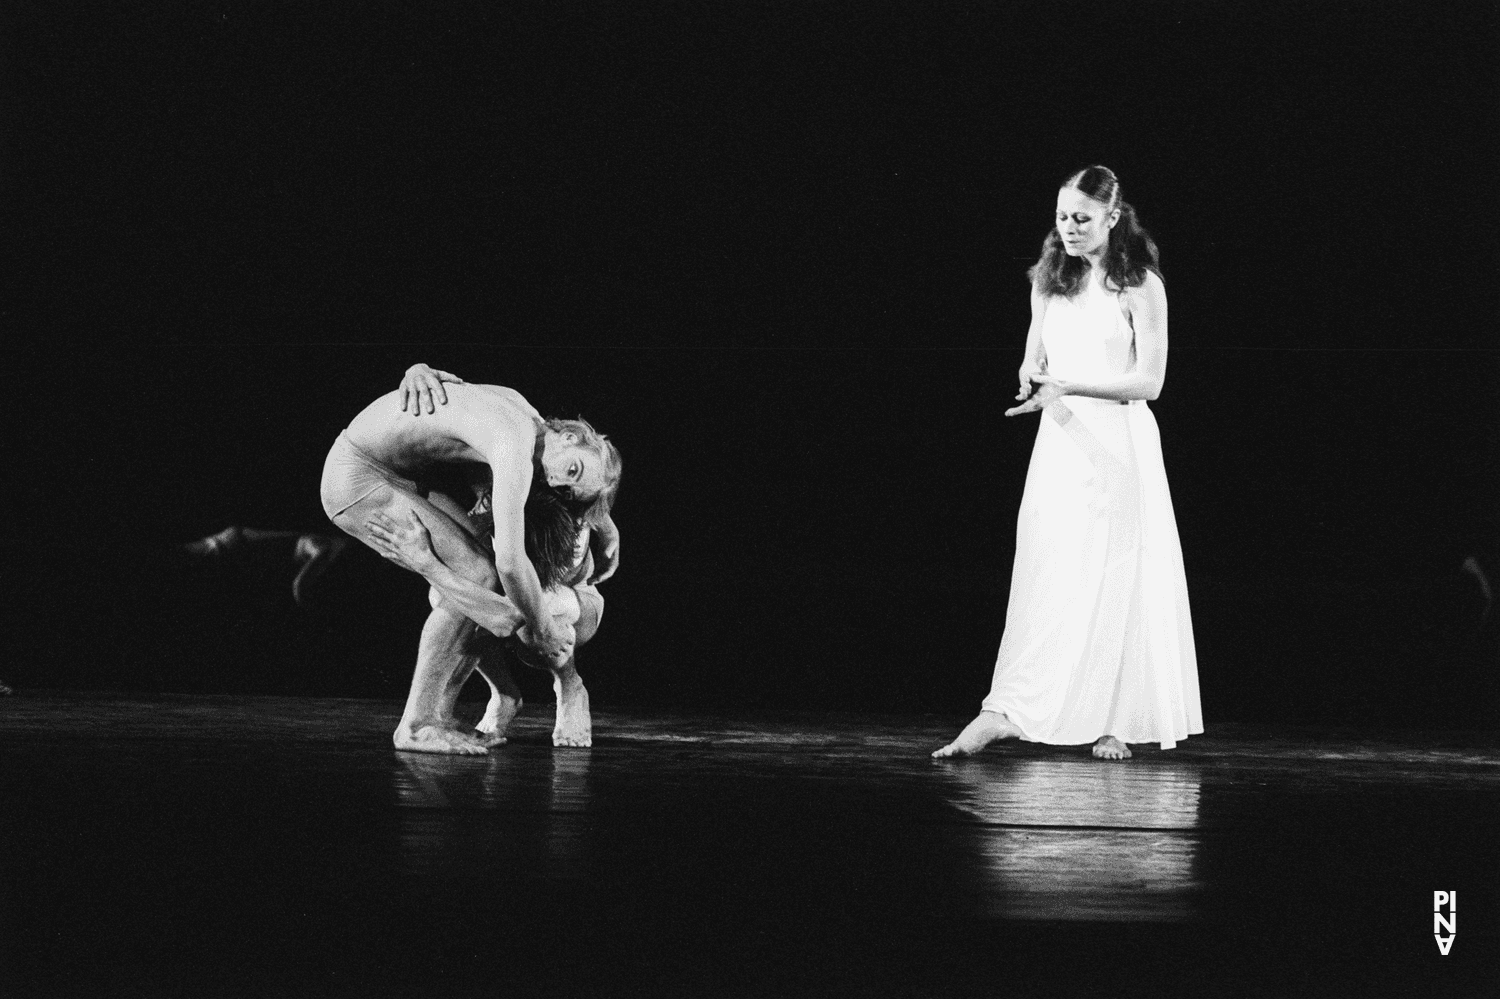 Dominique Mercy, Malou Airaudo and Ed Kortlandt in “Iphigenie auf Tauris” by Pina Bausch at Opernhaus Wuppertal, season 1973/74